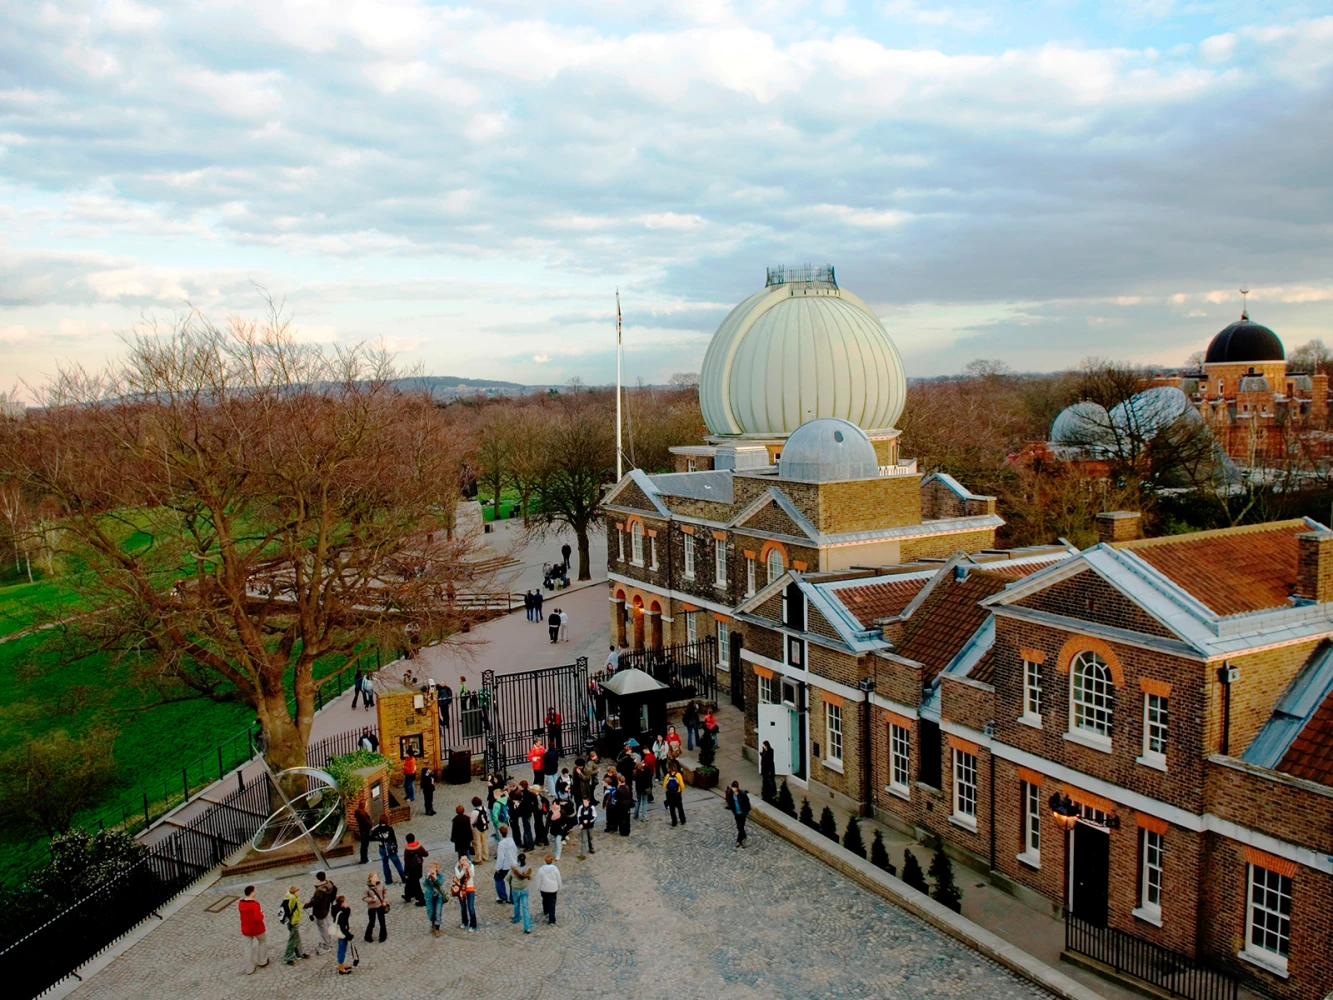 Royal Observatory : What to expect - 2